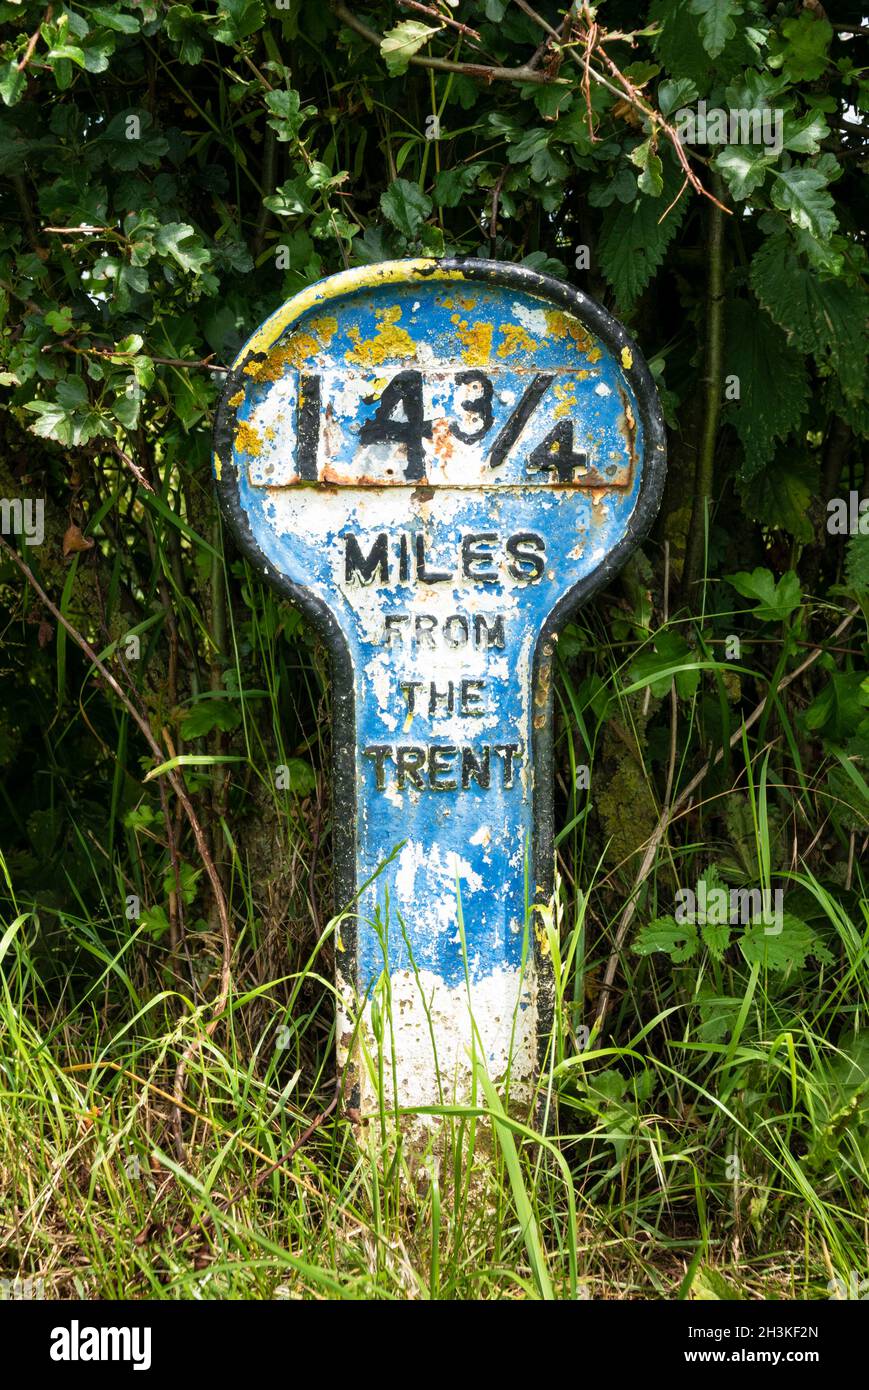 Nottingham to Grantham Canal 14 3/4 miles from the Trent Mile marker post near Hose on the Grantham Canal Leicestershire England UK GB Europe Stock Photo